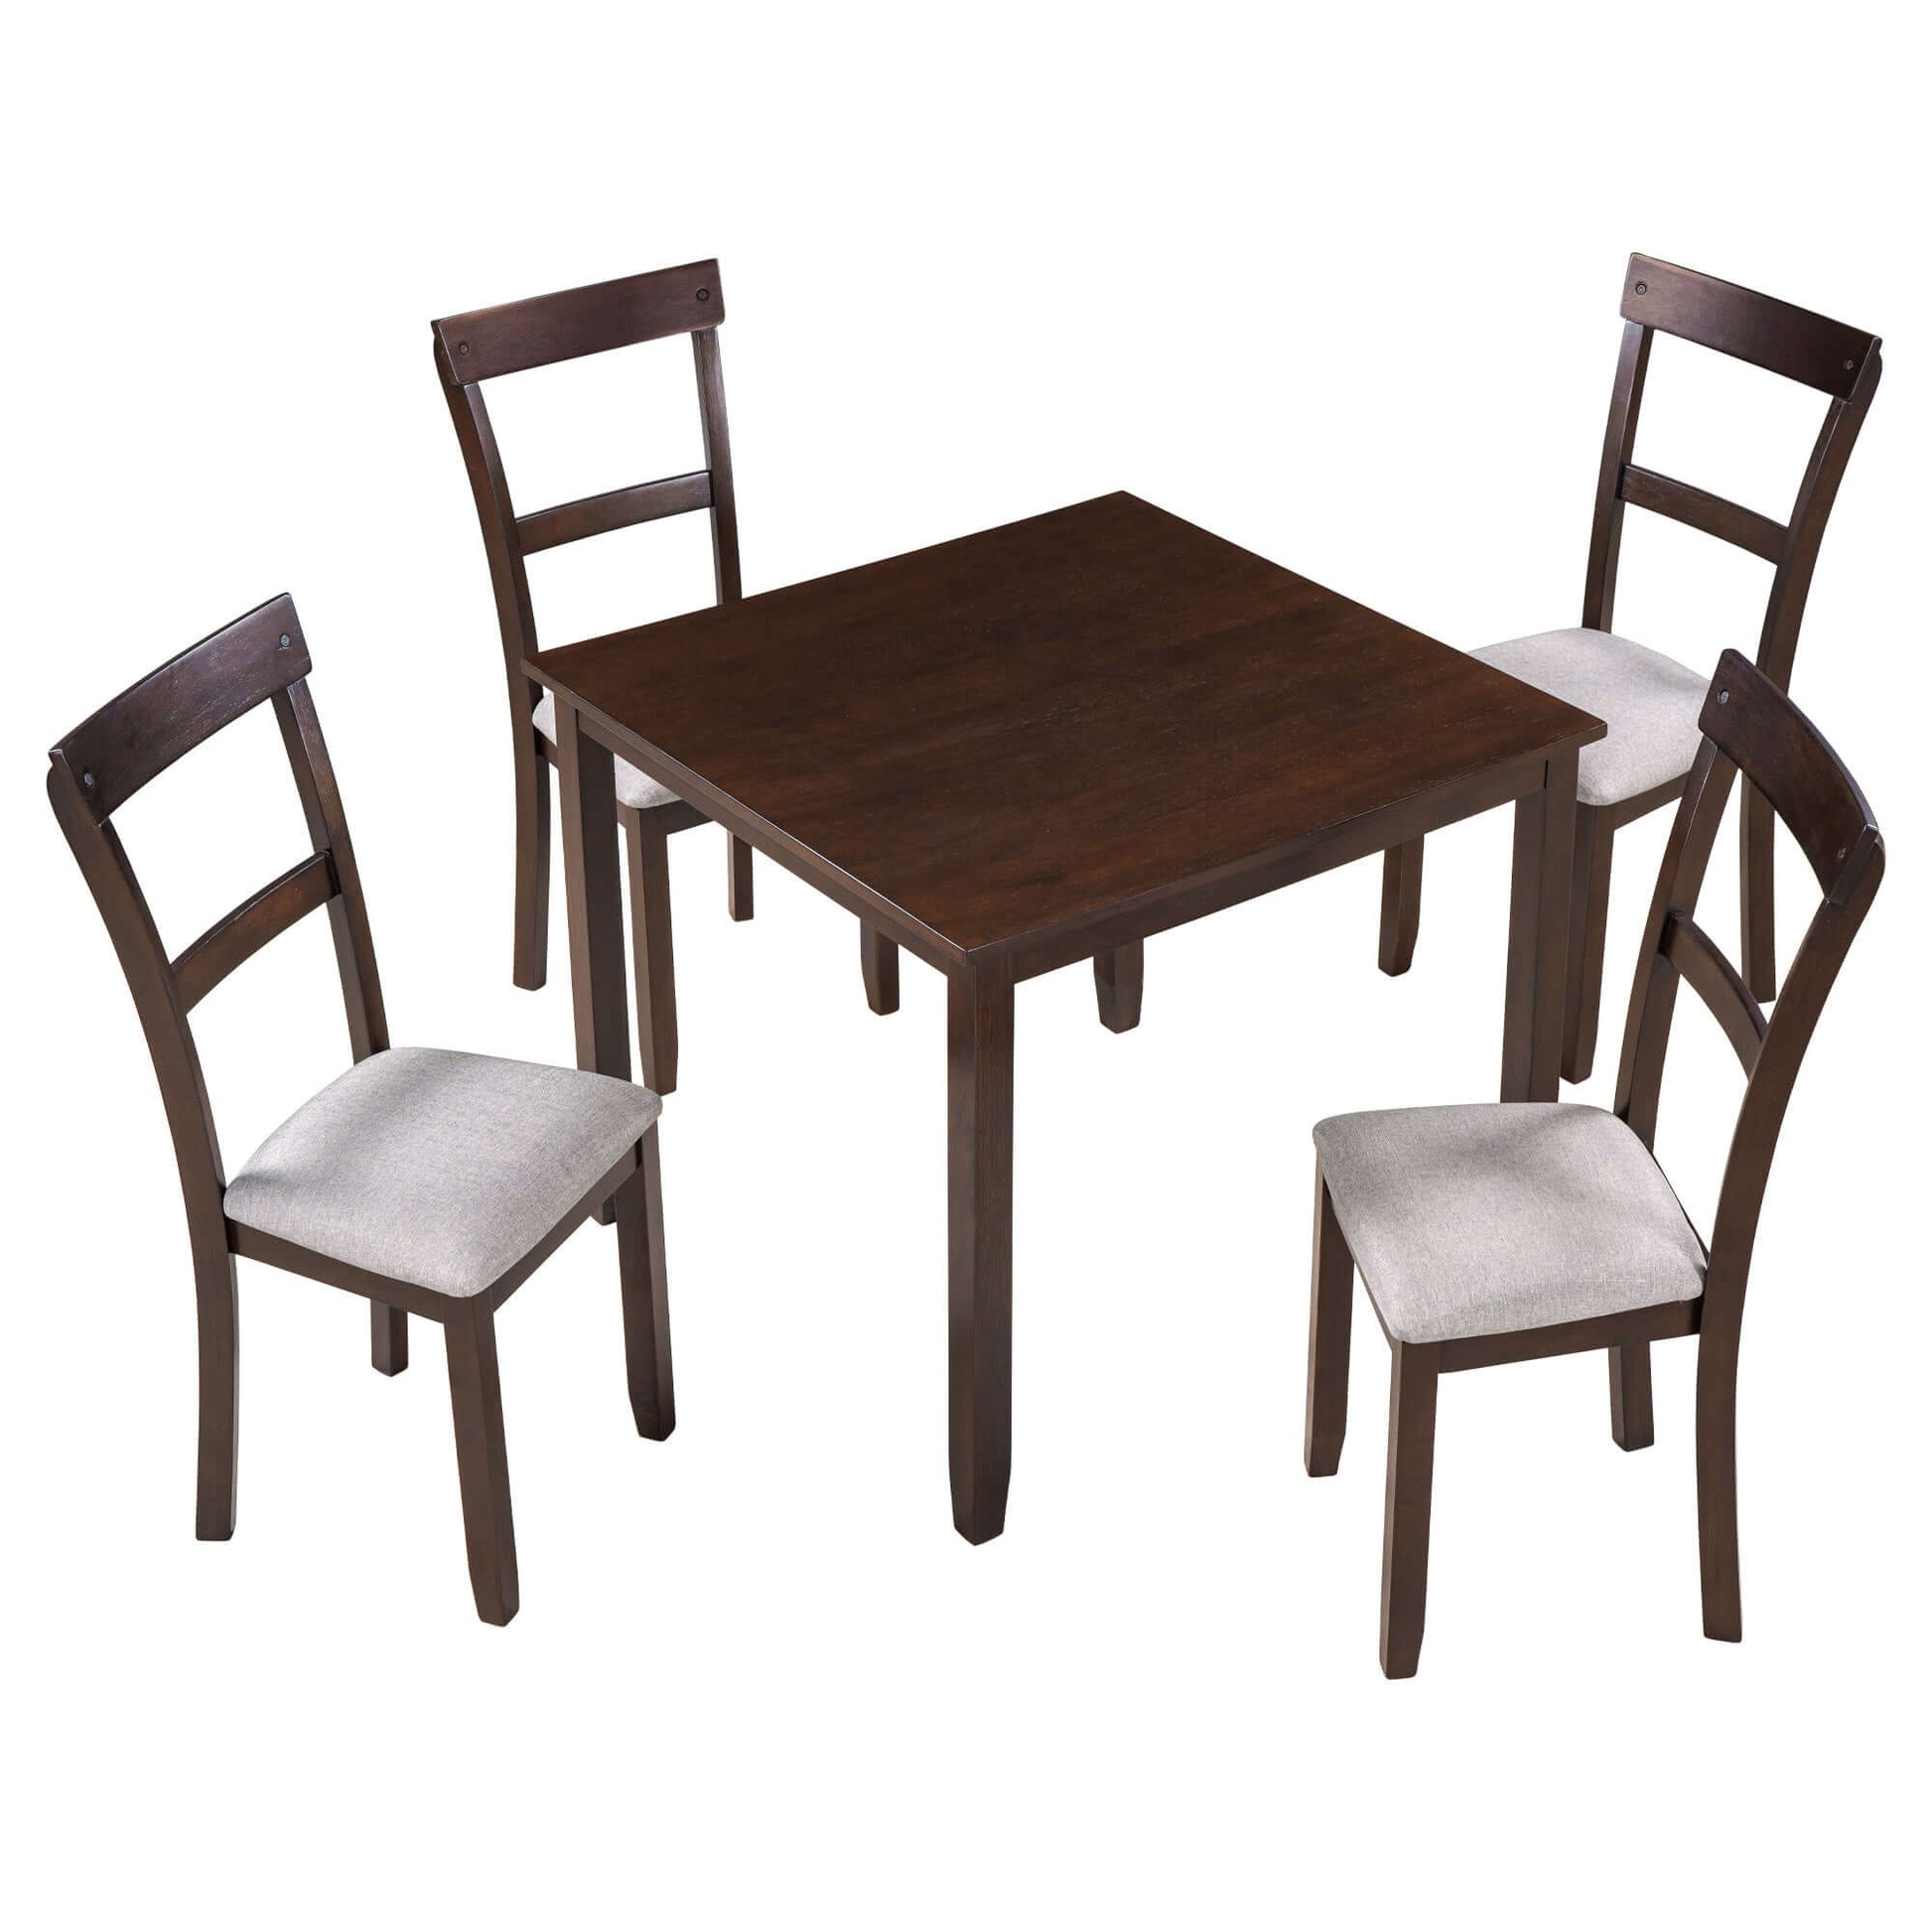 5 Piece Dining Table Set with Espresso Wooden Table and 4 Chairs for Dining Room